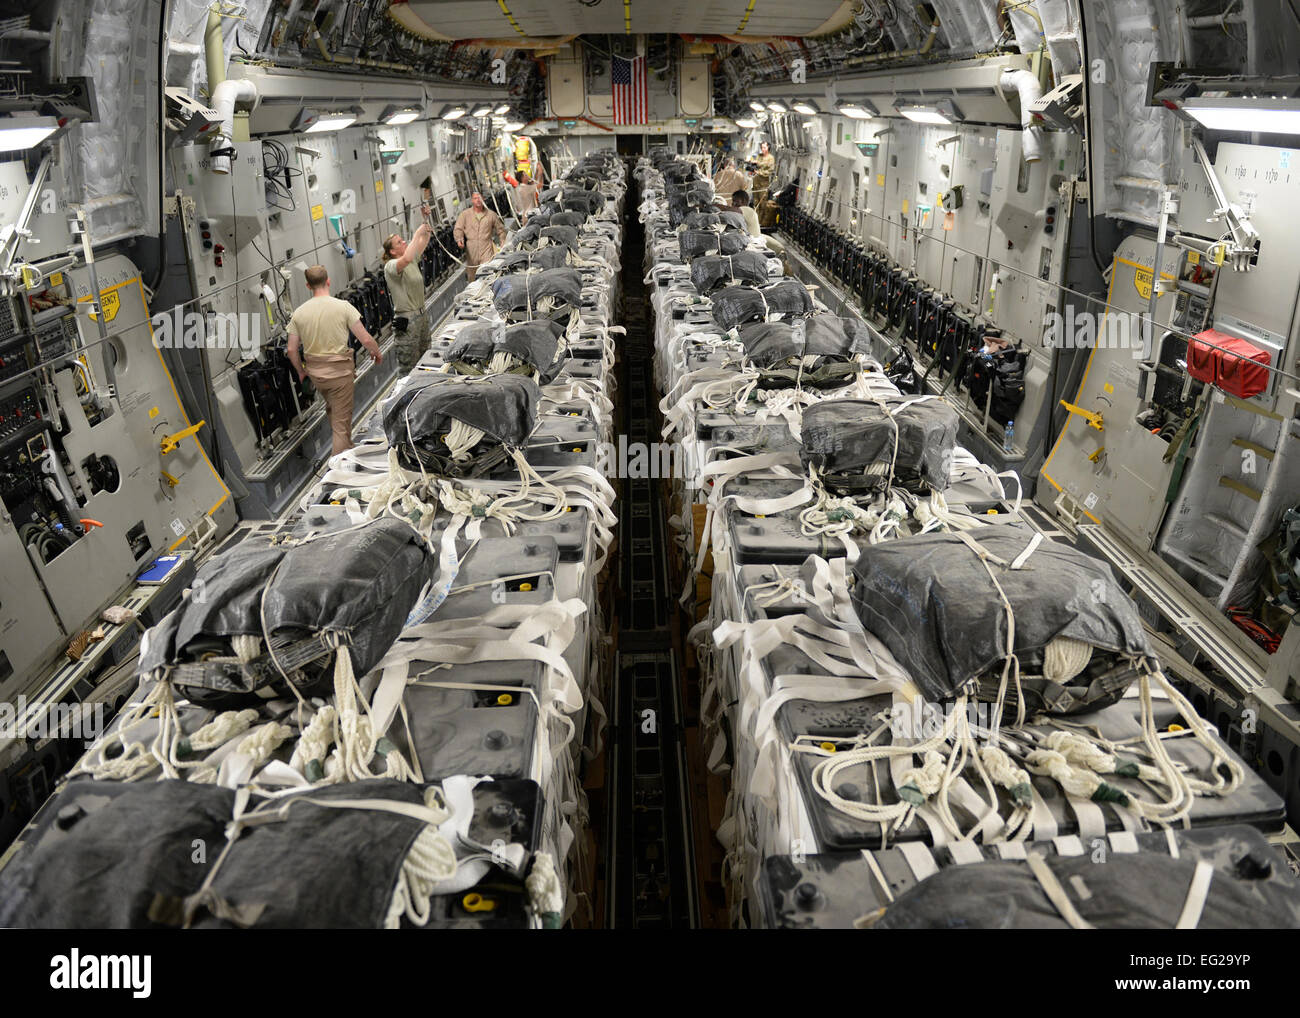 U.S. Army parachute riggers from the 11th Quartermaster Company assemble 40 container delivery system bundles of water onto a C-17 Globemaster III for a humanitarian airdrop over the area if Amirli, Iraq Aug. 30, 2014. Two C-17s dropped 79 bundles of fresh drinking water totaling 7,513 gallons. In addition, two C-130 Hercules dropped 30 bundles containing 3,032 gallons of water and 7,056 Halal Meals Ready to Eat.  Staff Sgt. Shawn Nickel Stock Photo